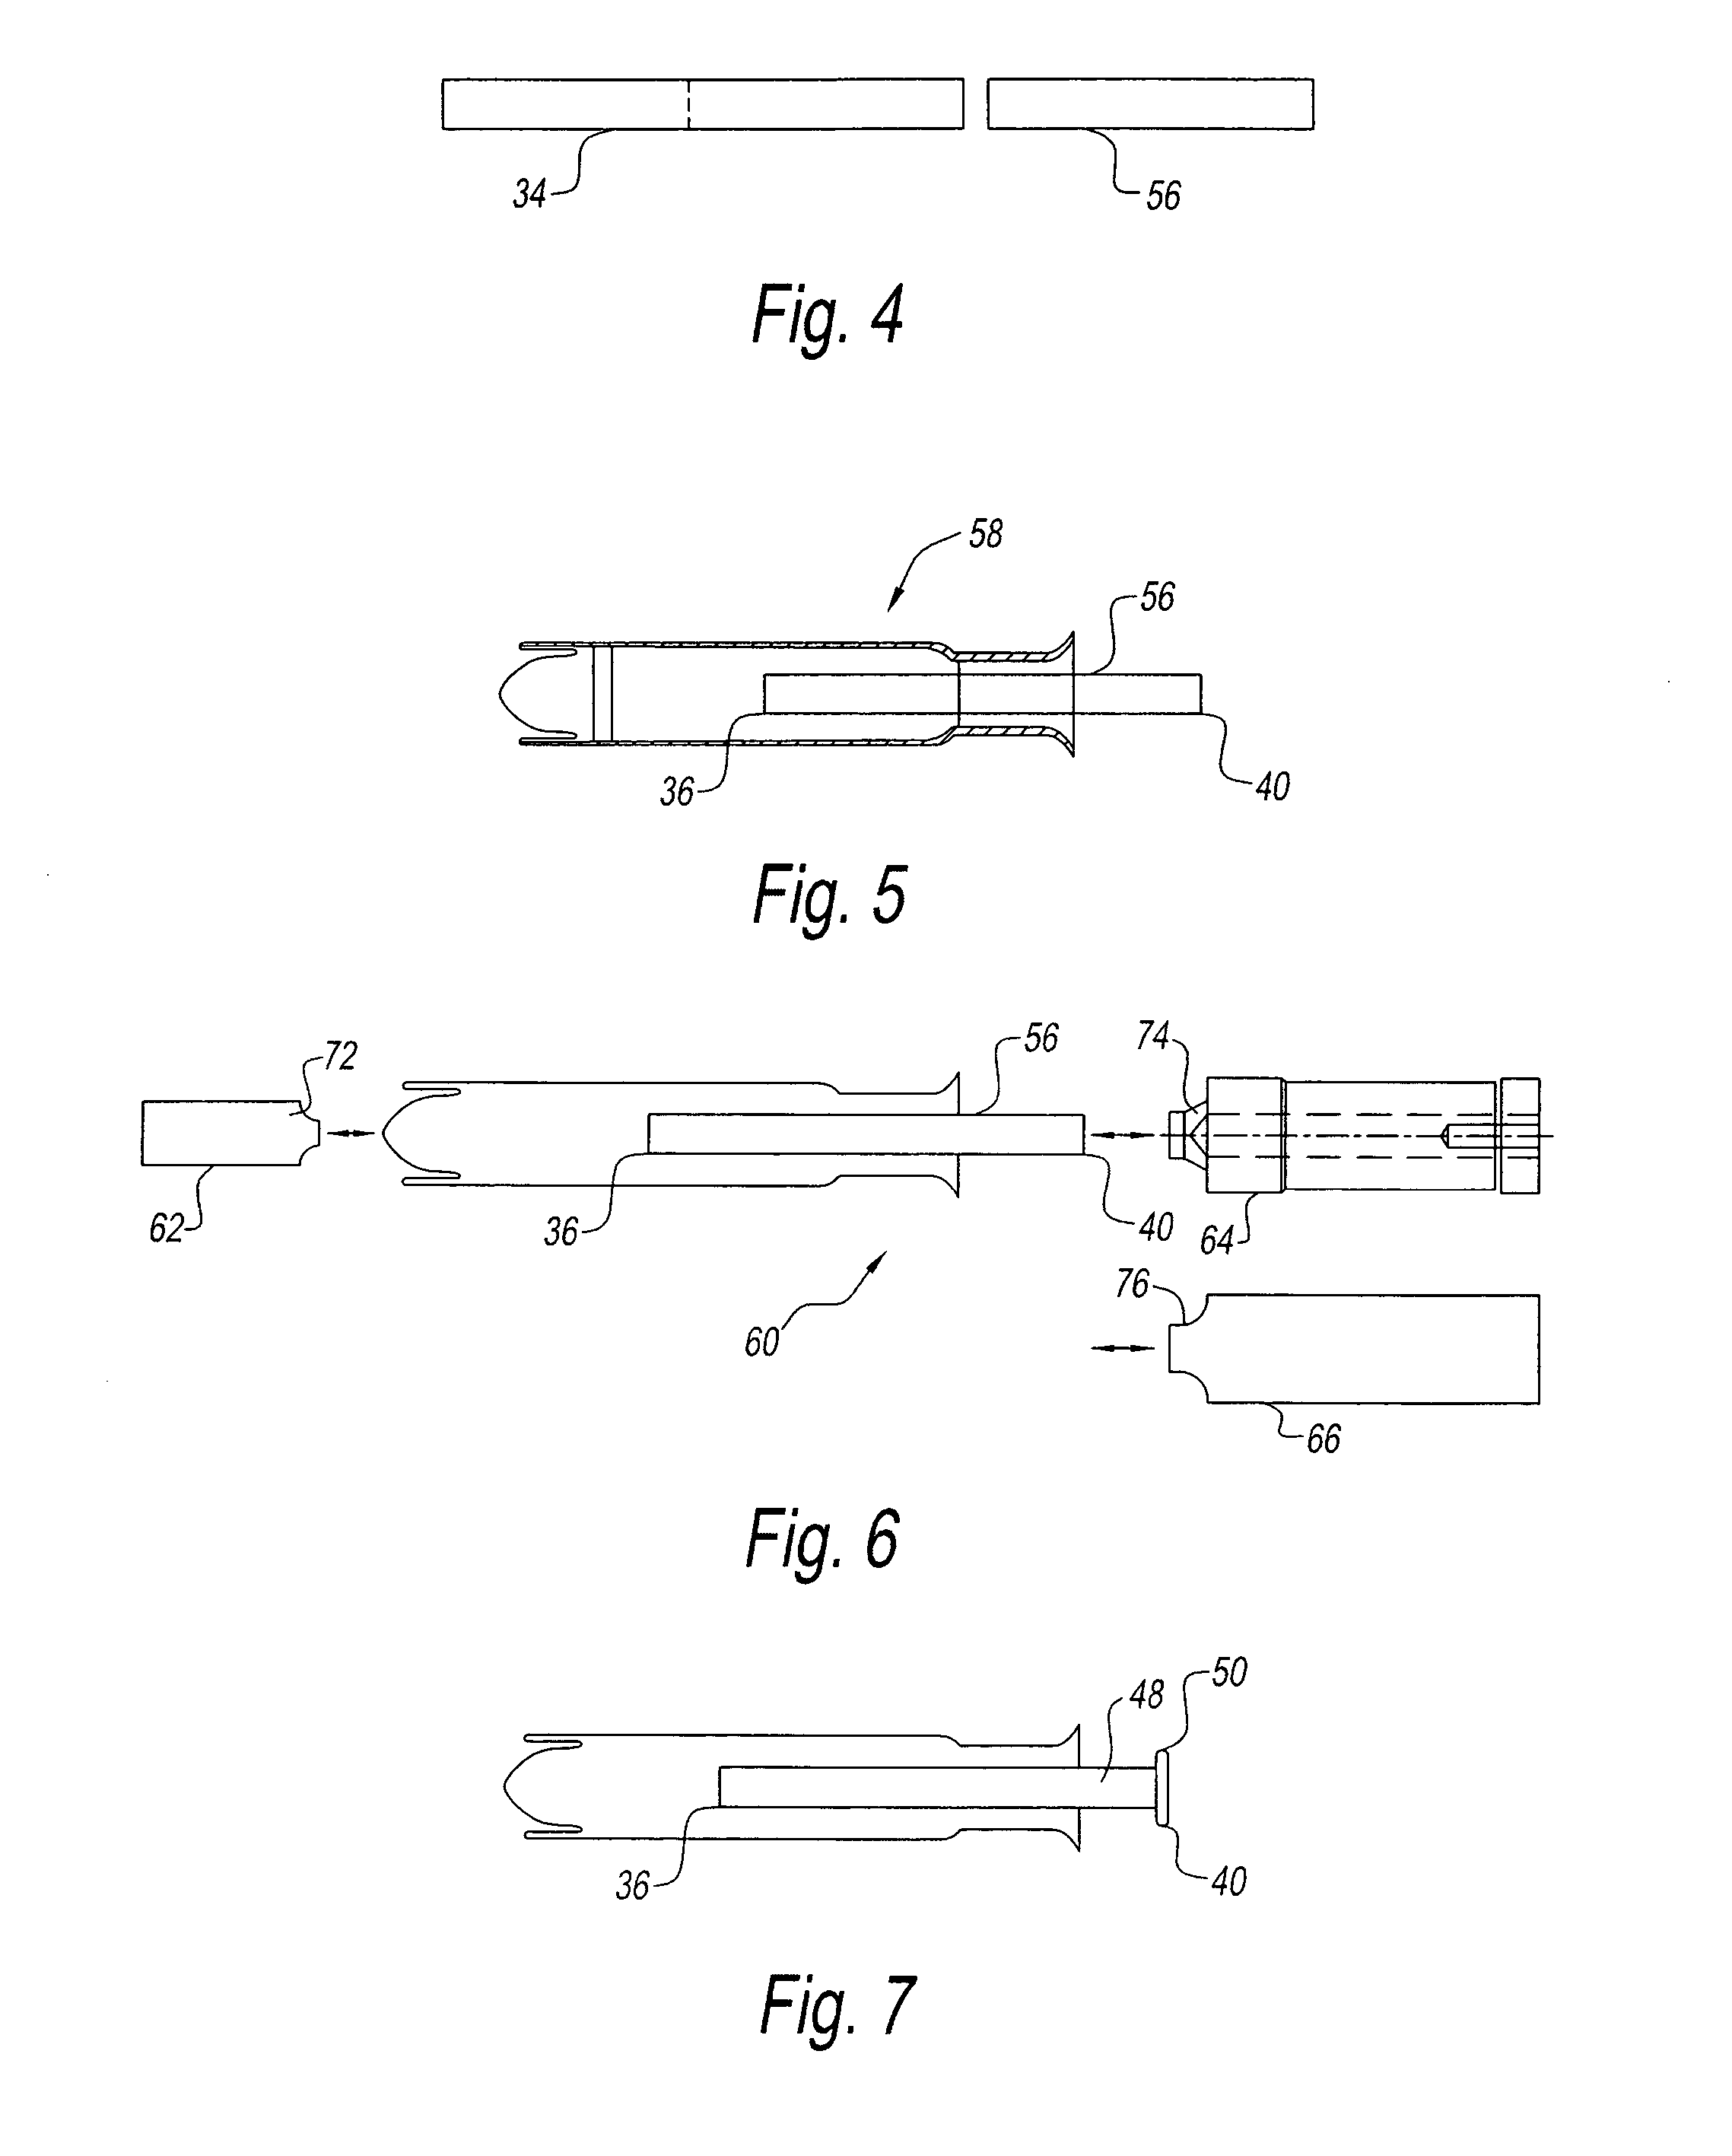 Tampon applicator assembly having an improved plunger and methods of making